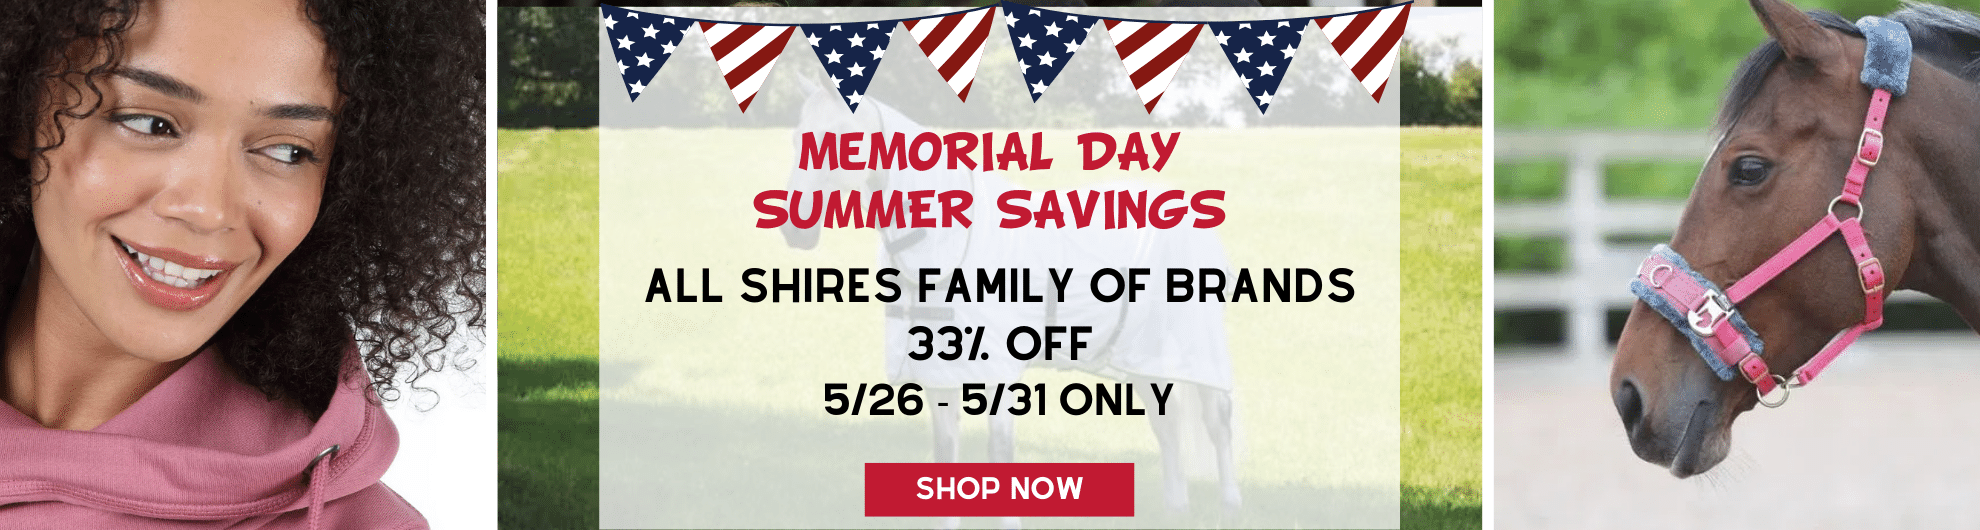 Memorial Day Sale - Shires